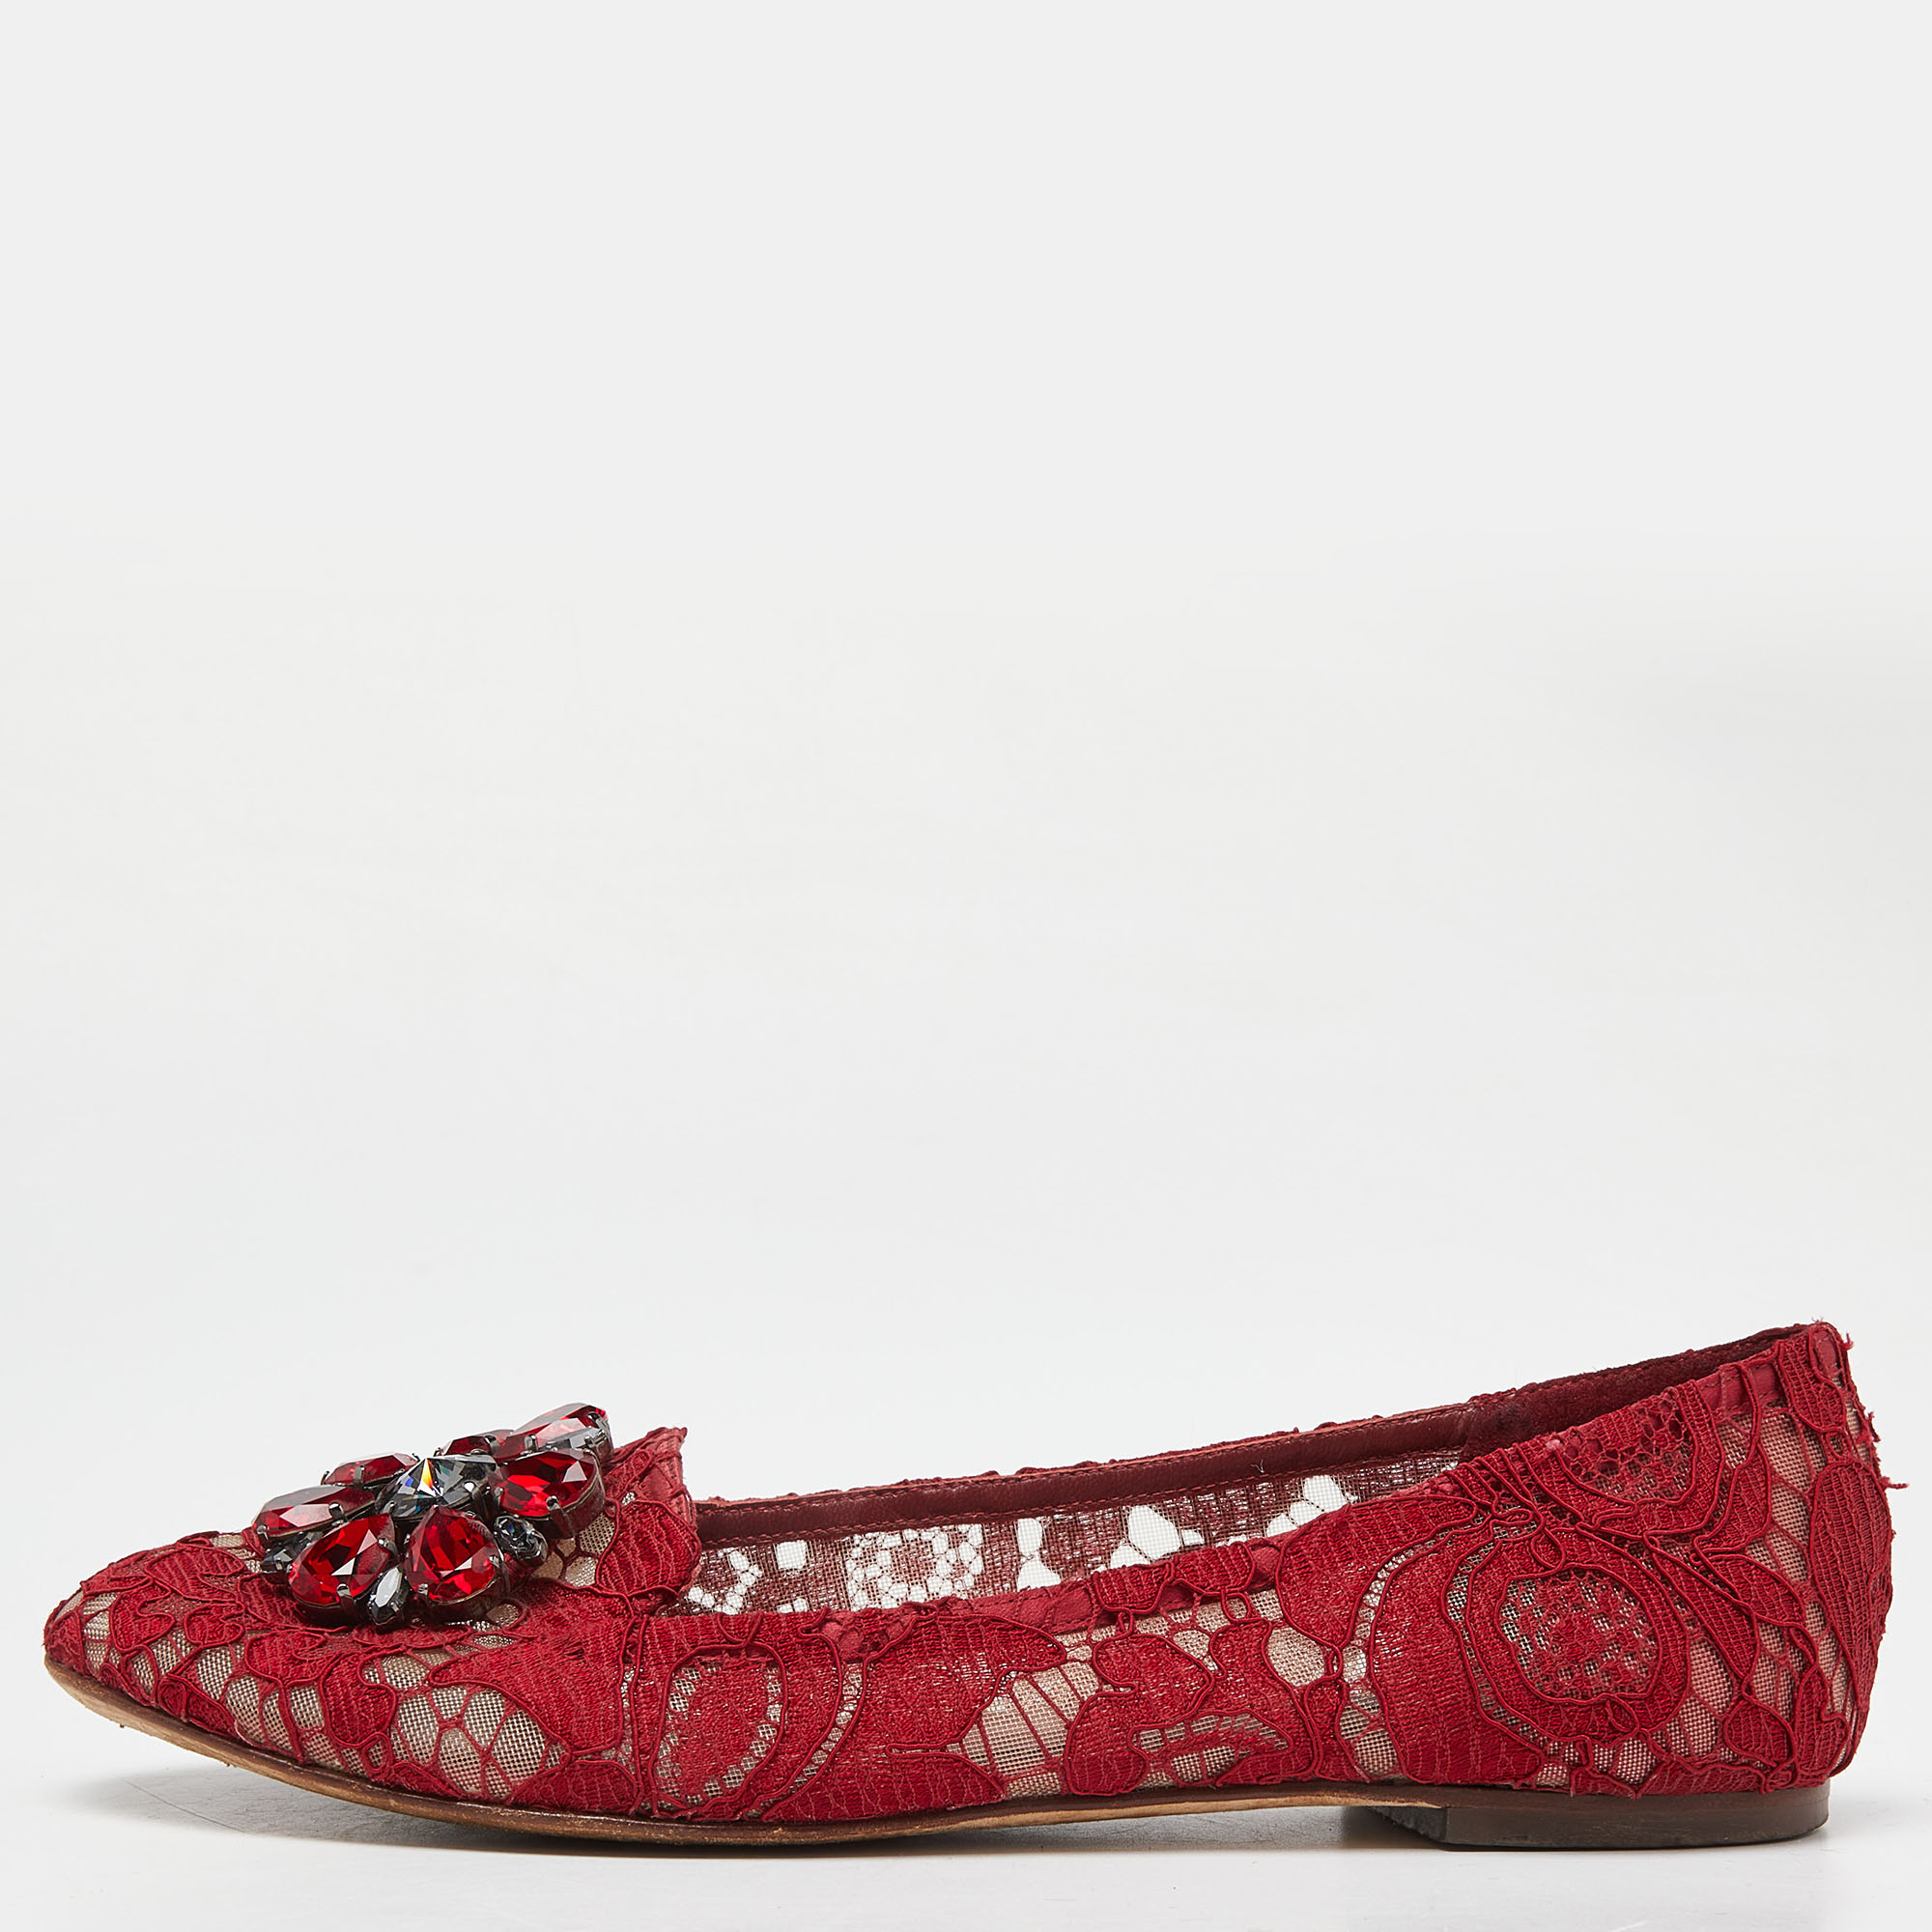 Pre-owned Dolce & Gabbana Red Lace Crystal Embellished Taormina Ballet Flats Size 38